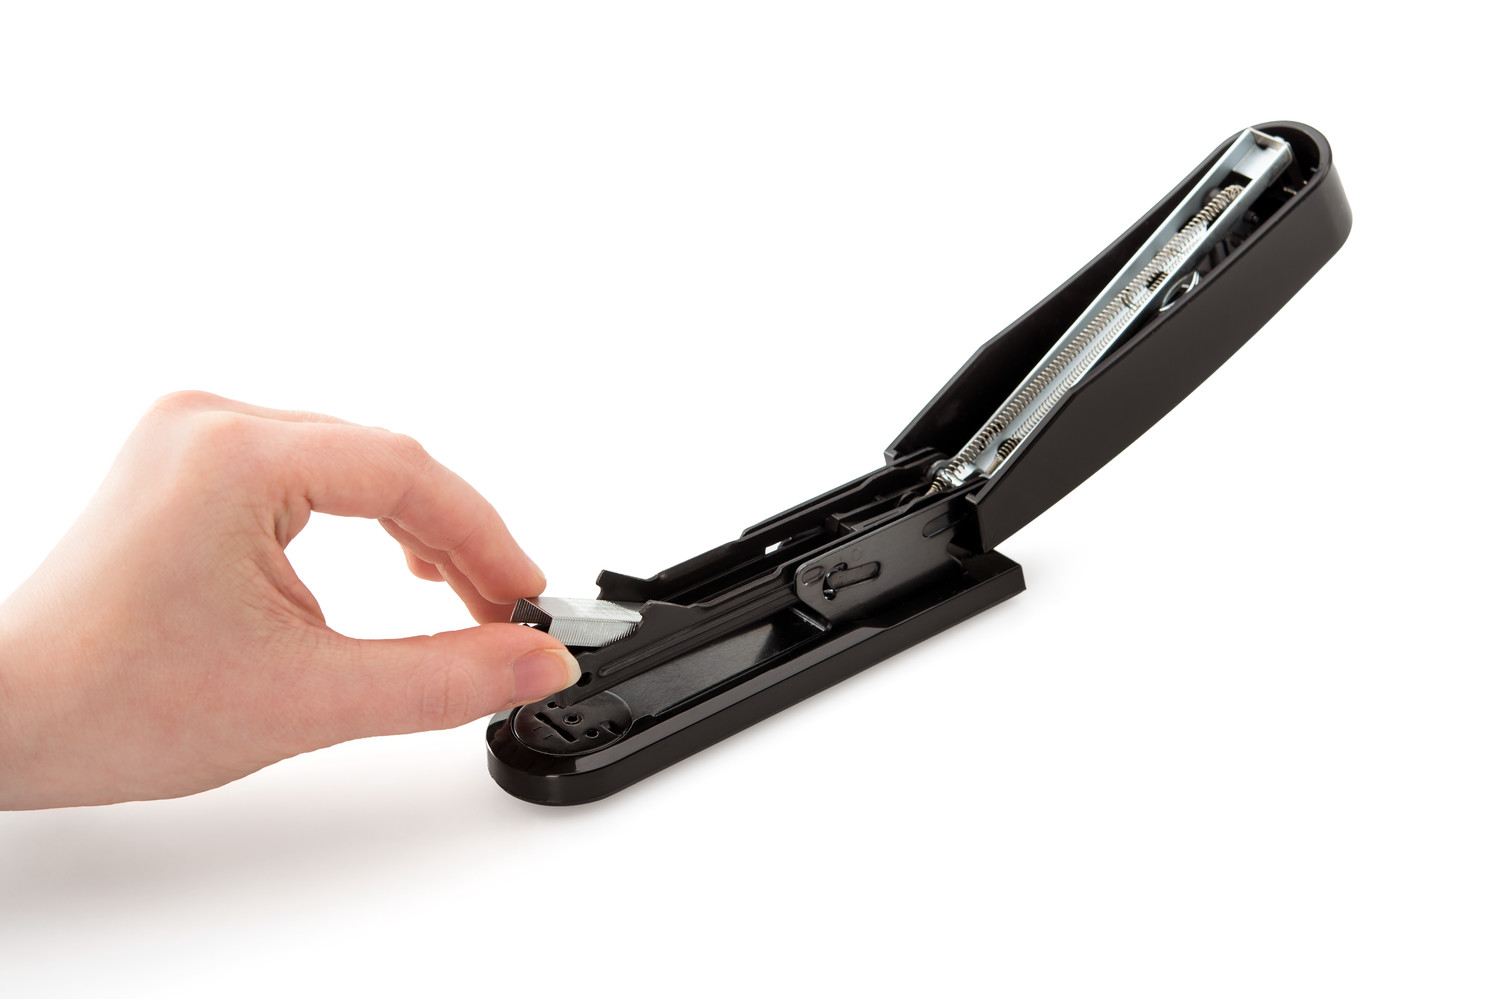 With the top-loading mechanism, the staples are inserted into the stapler after raising the top part.